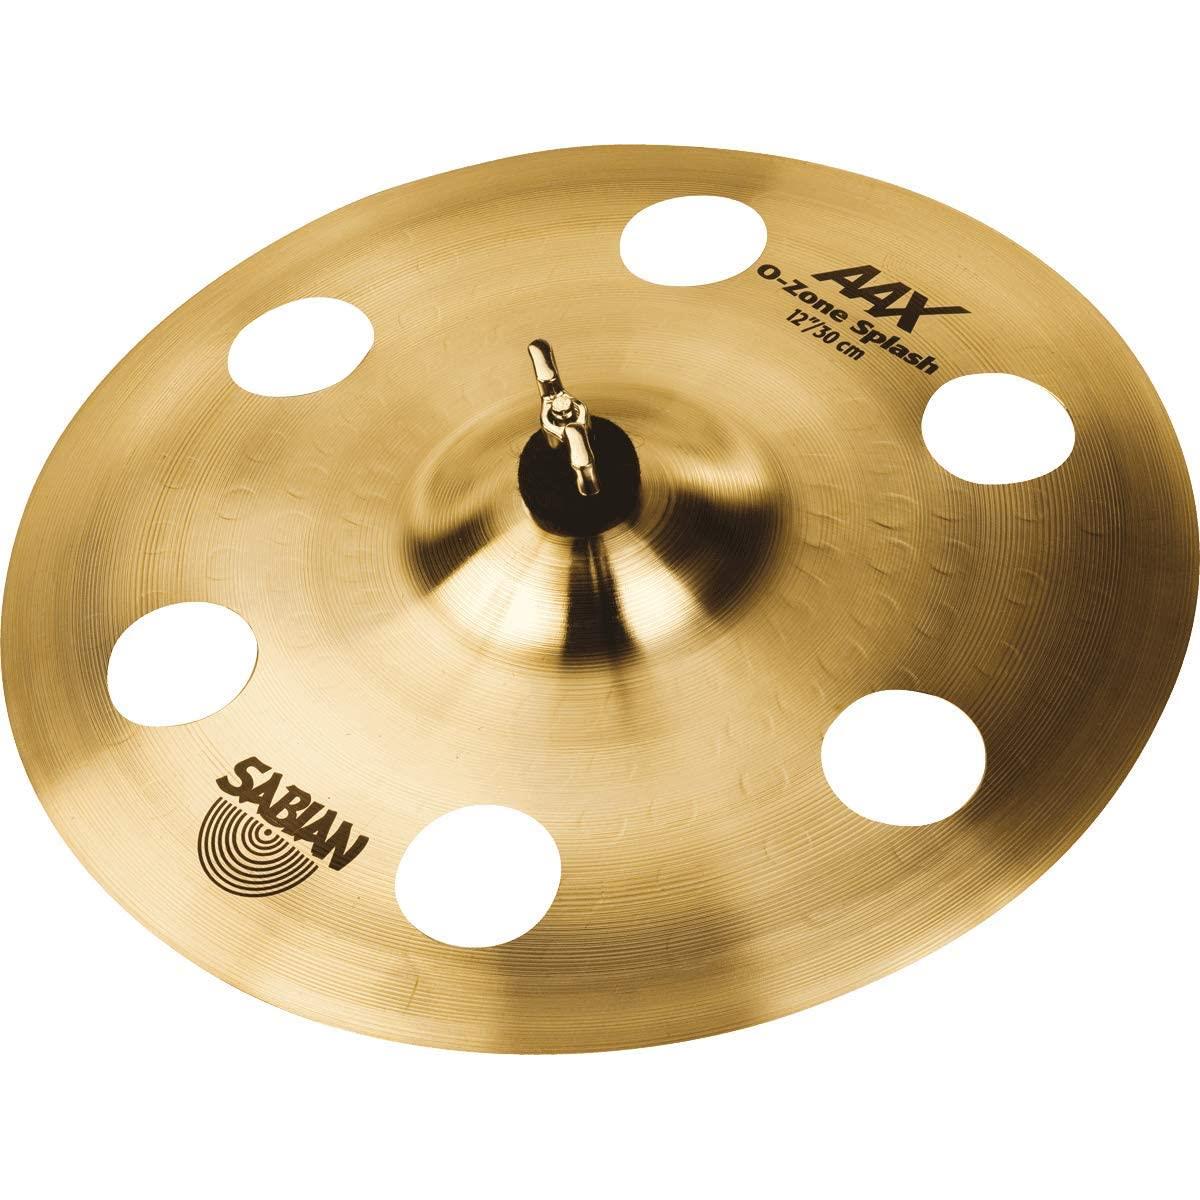 Sabian 12" AAX O-Zone Splash Cymbal, Extra-Thin Multi-hole design of the SABIAN 12" AAX O-Zone Splash delivers bright, airy sounds with a degree of agitation. The SABIAN AAX series delivers consistently bright, crisp, clear and cutting responses - AAX is the ultimate Modern Bright sound!